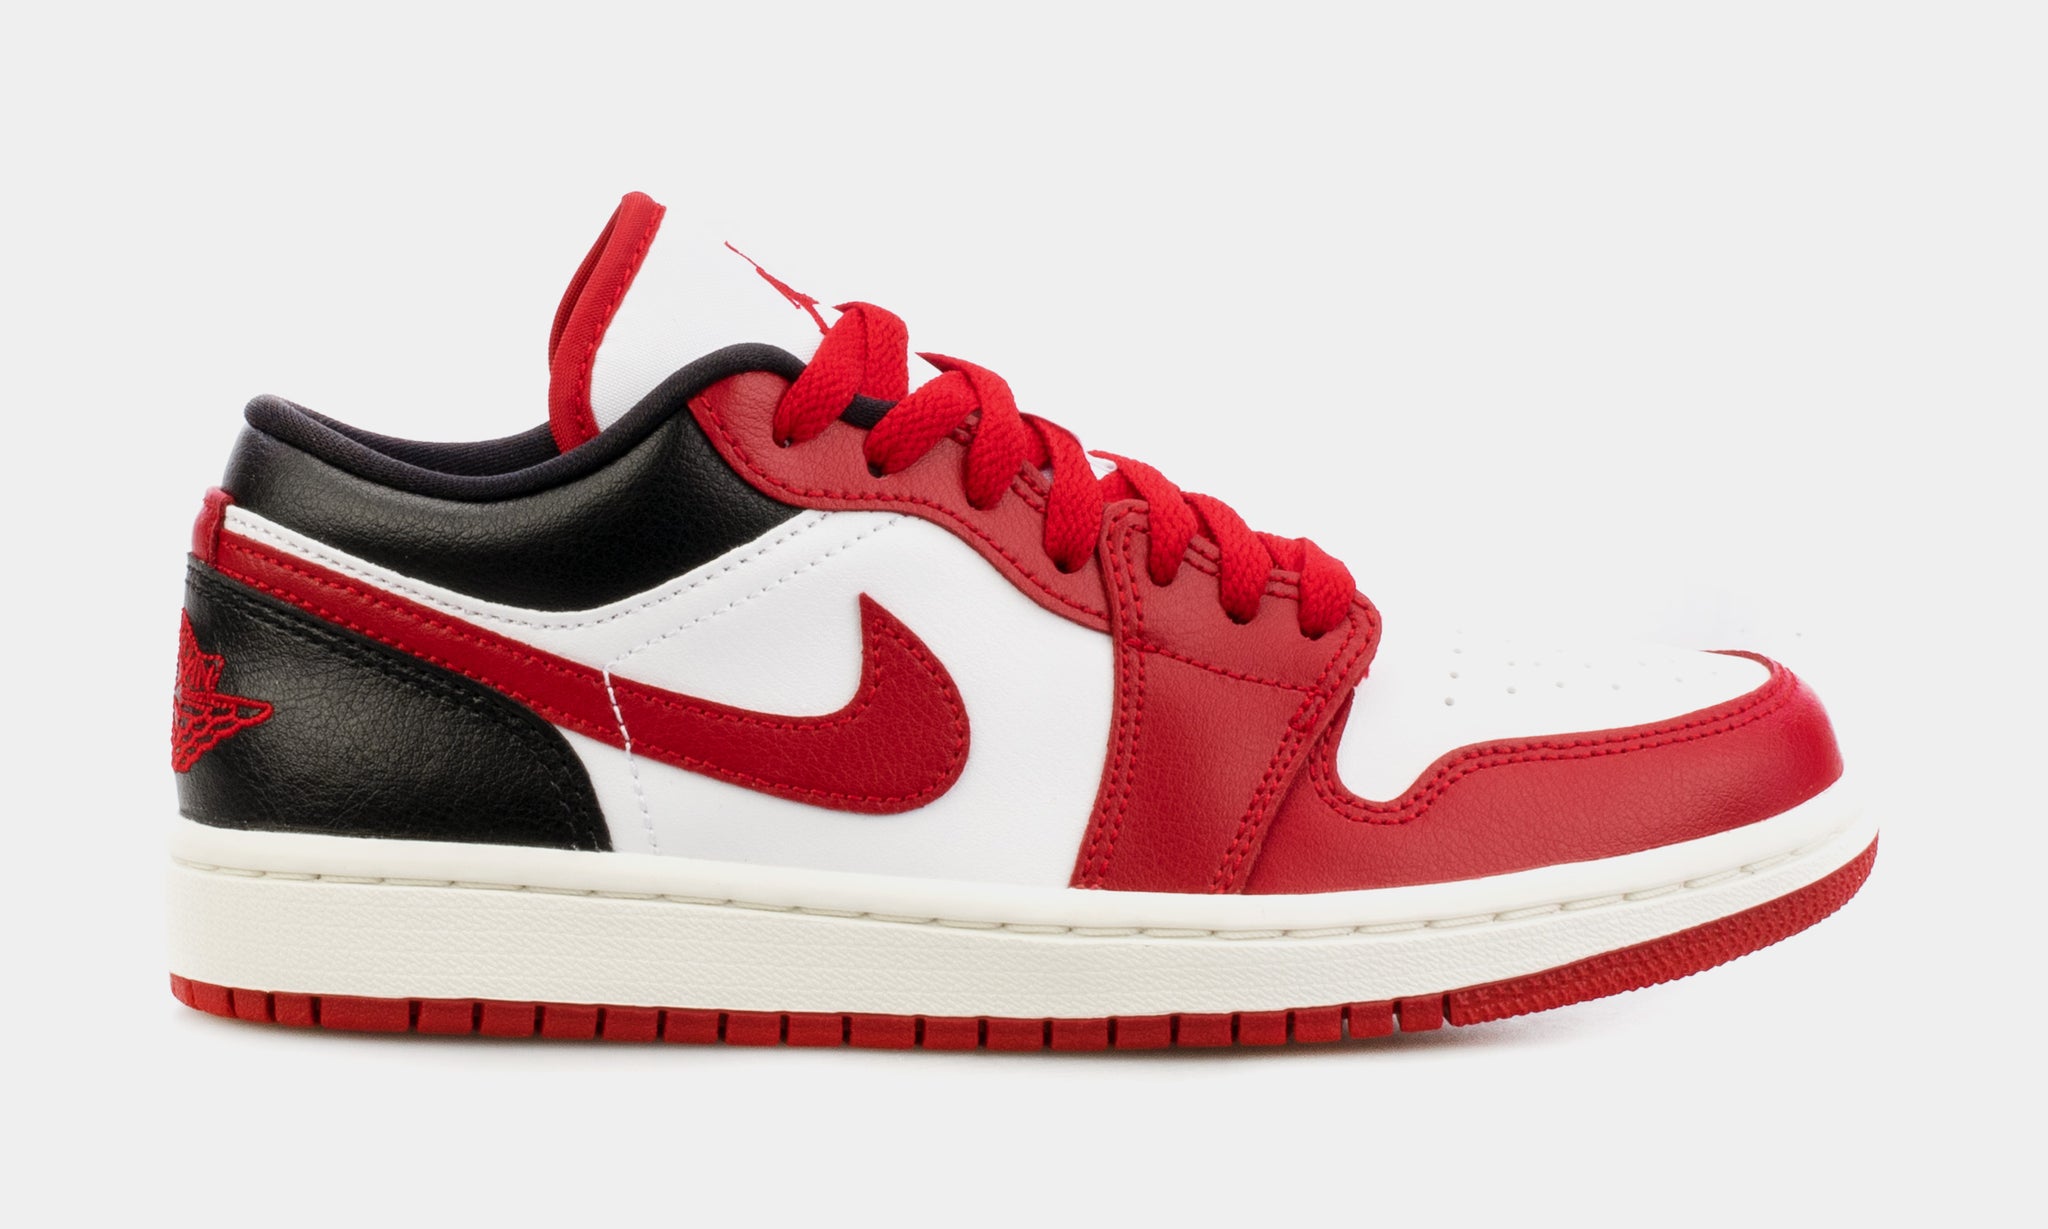 Air Jordan 1 Retro Low Gym Red Womens Lifestyle Shoes (Black/Red) Free  Shipping